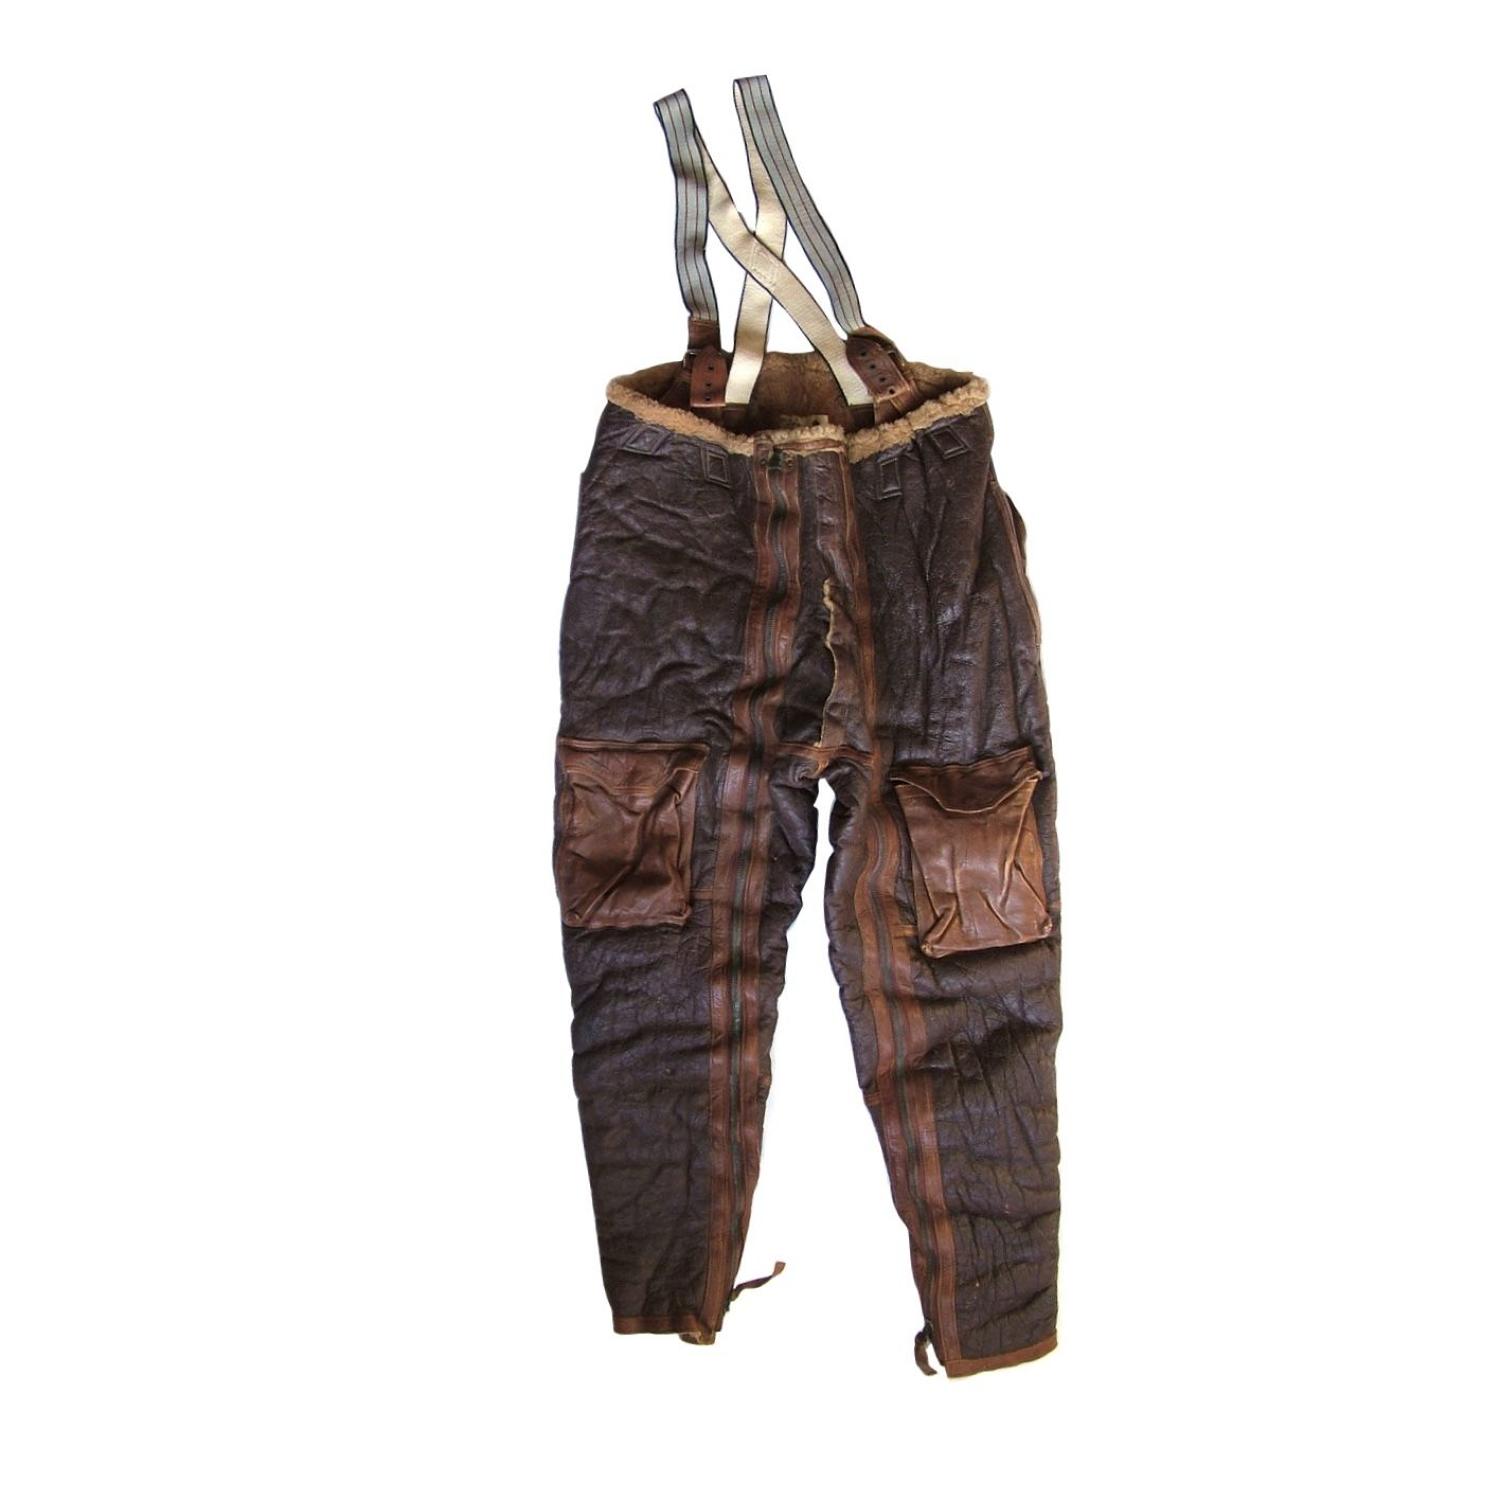 RAF 'Irvin' flying suit trousers